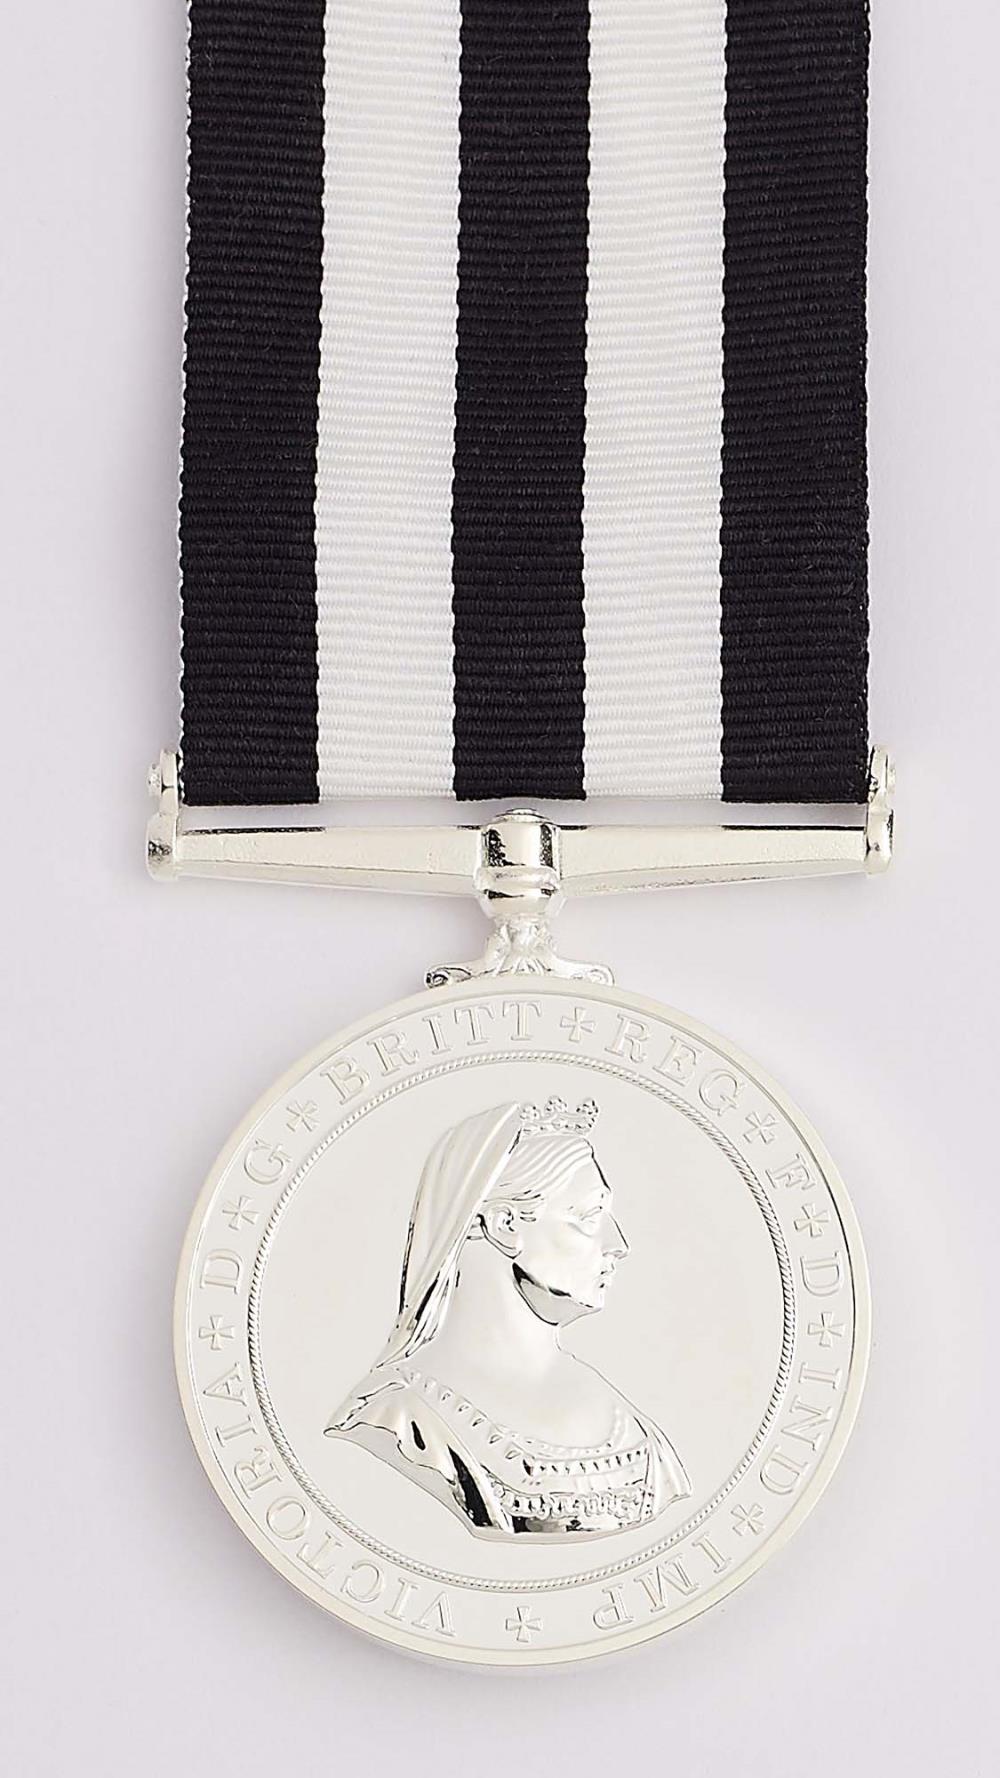 Service Medal of the Order